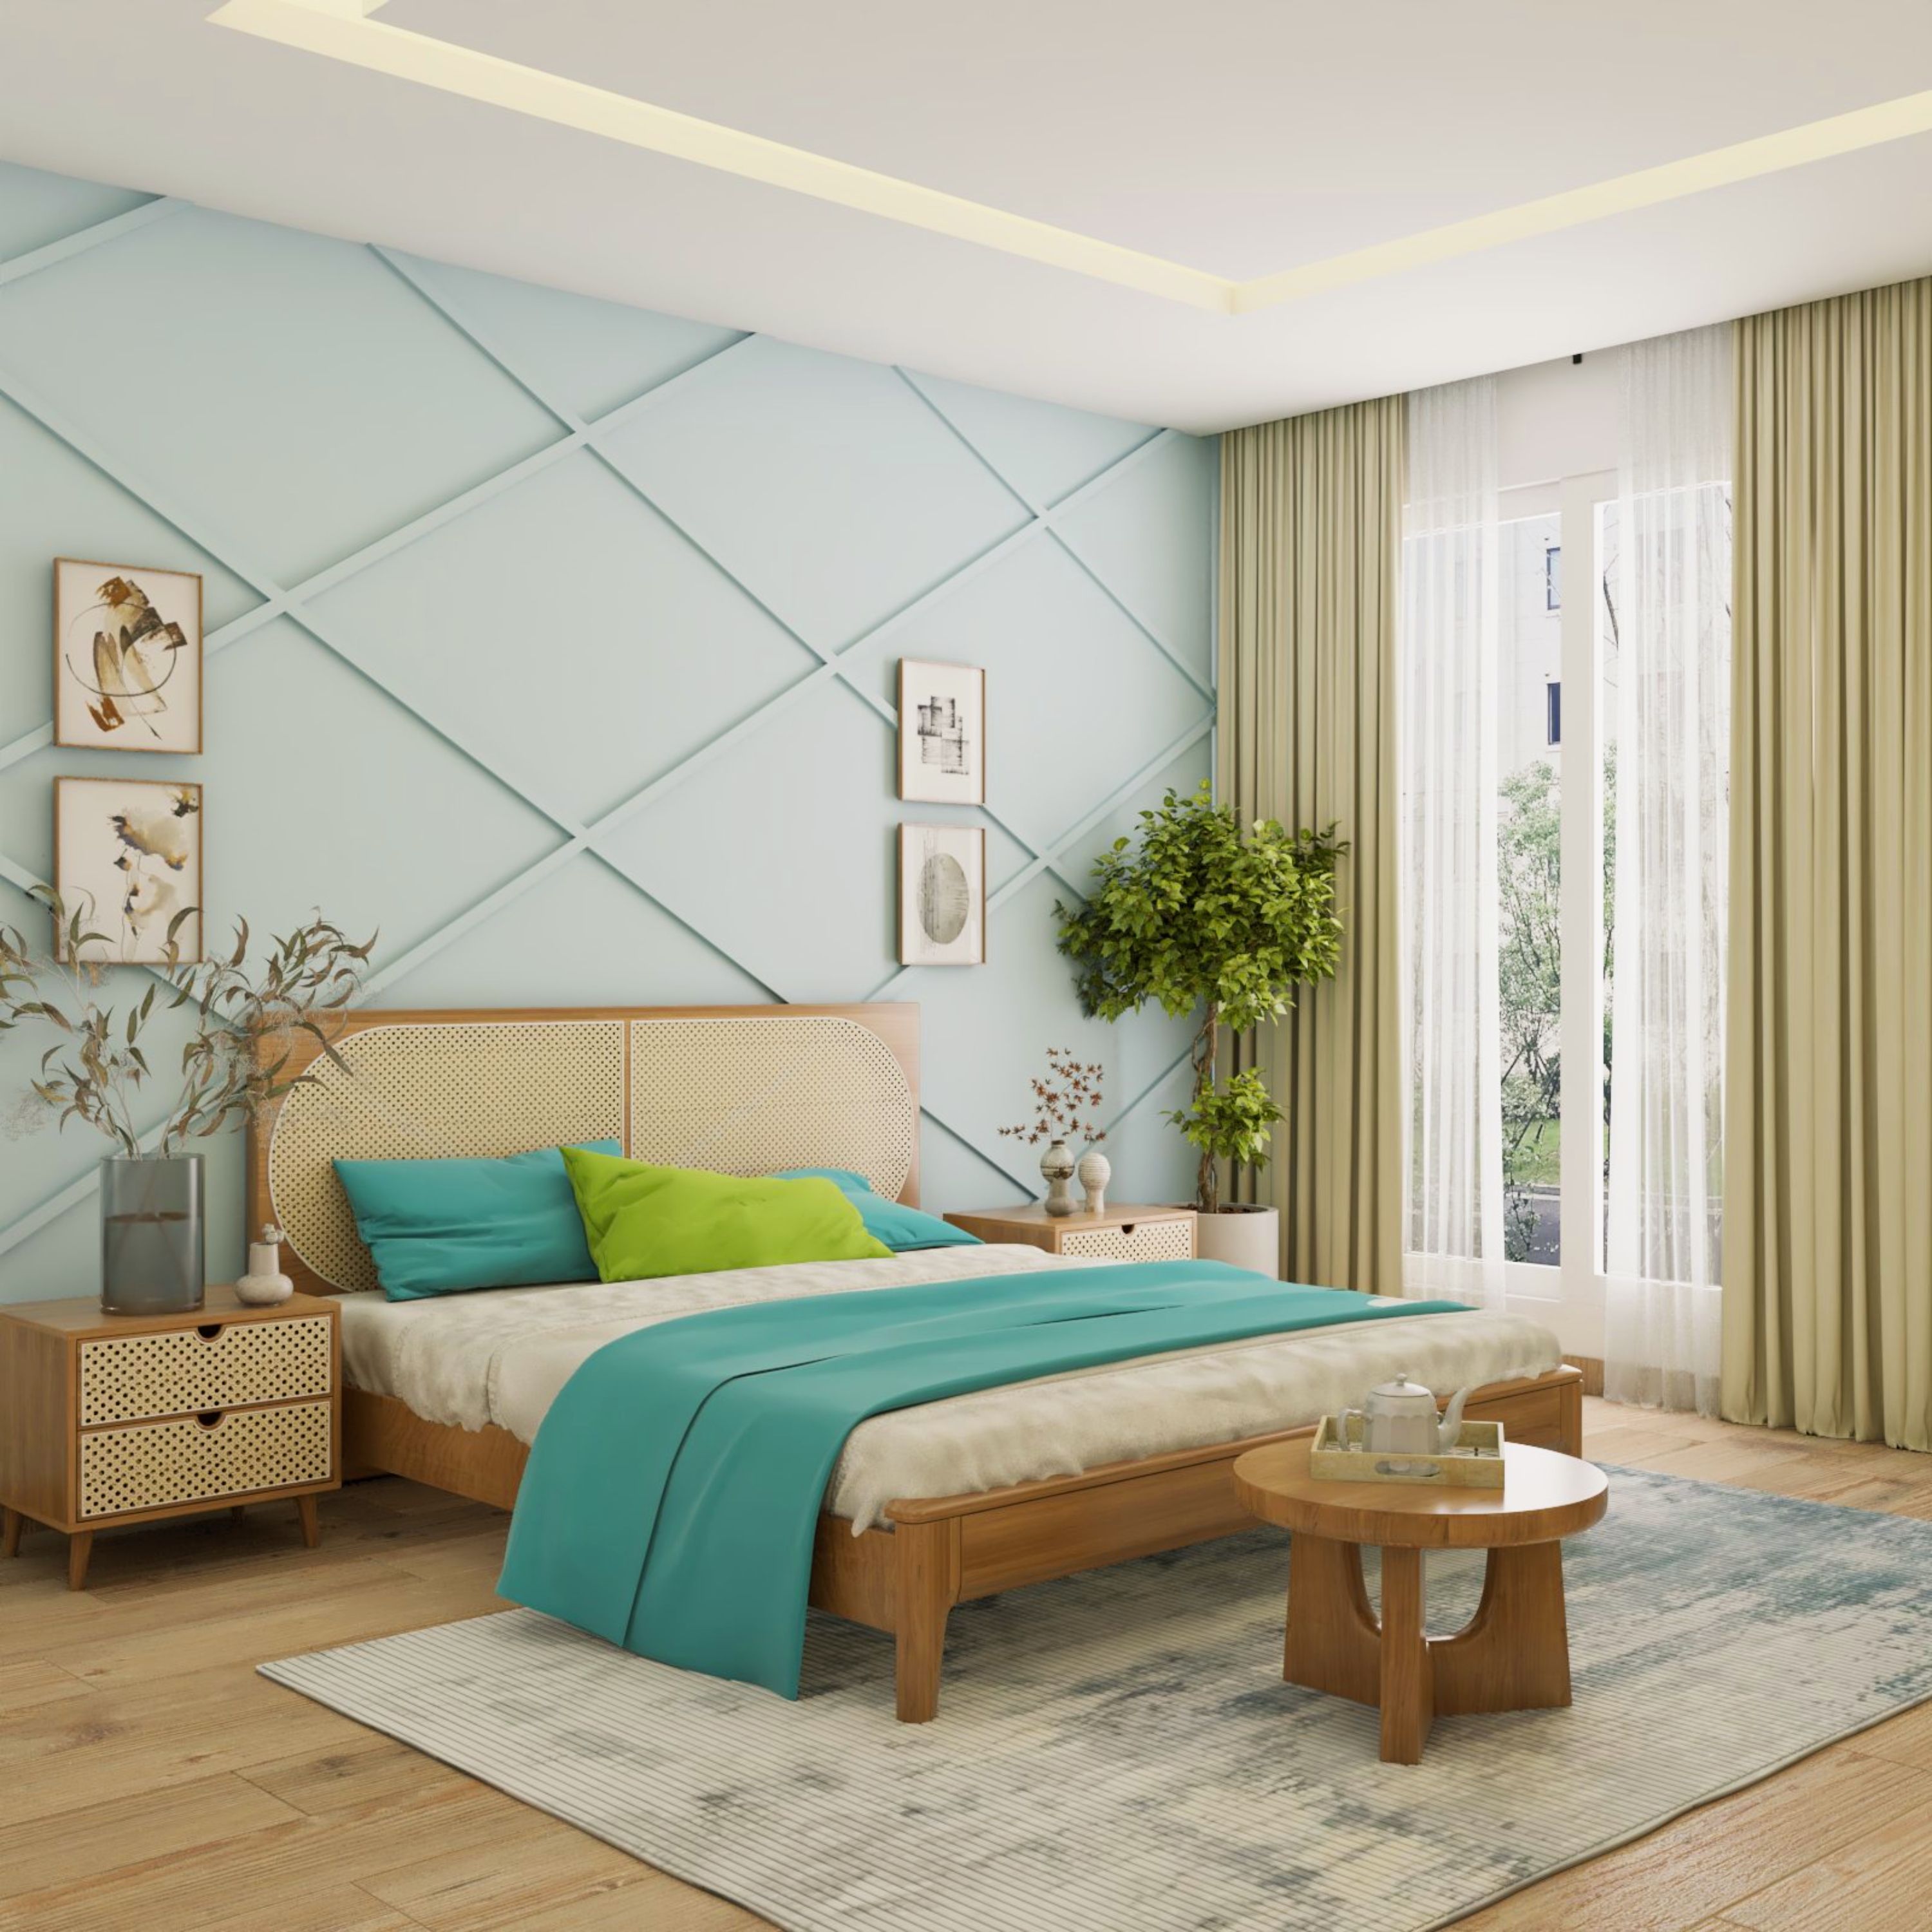 Modern Master Bedroom Design With Blue Accent Wall And 3D Wall Panelling